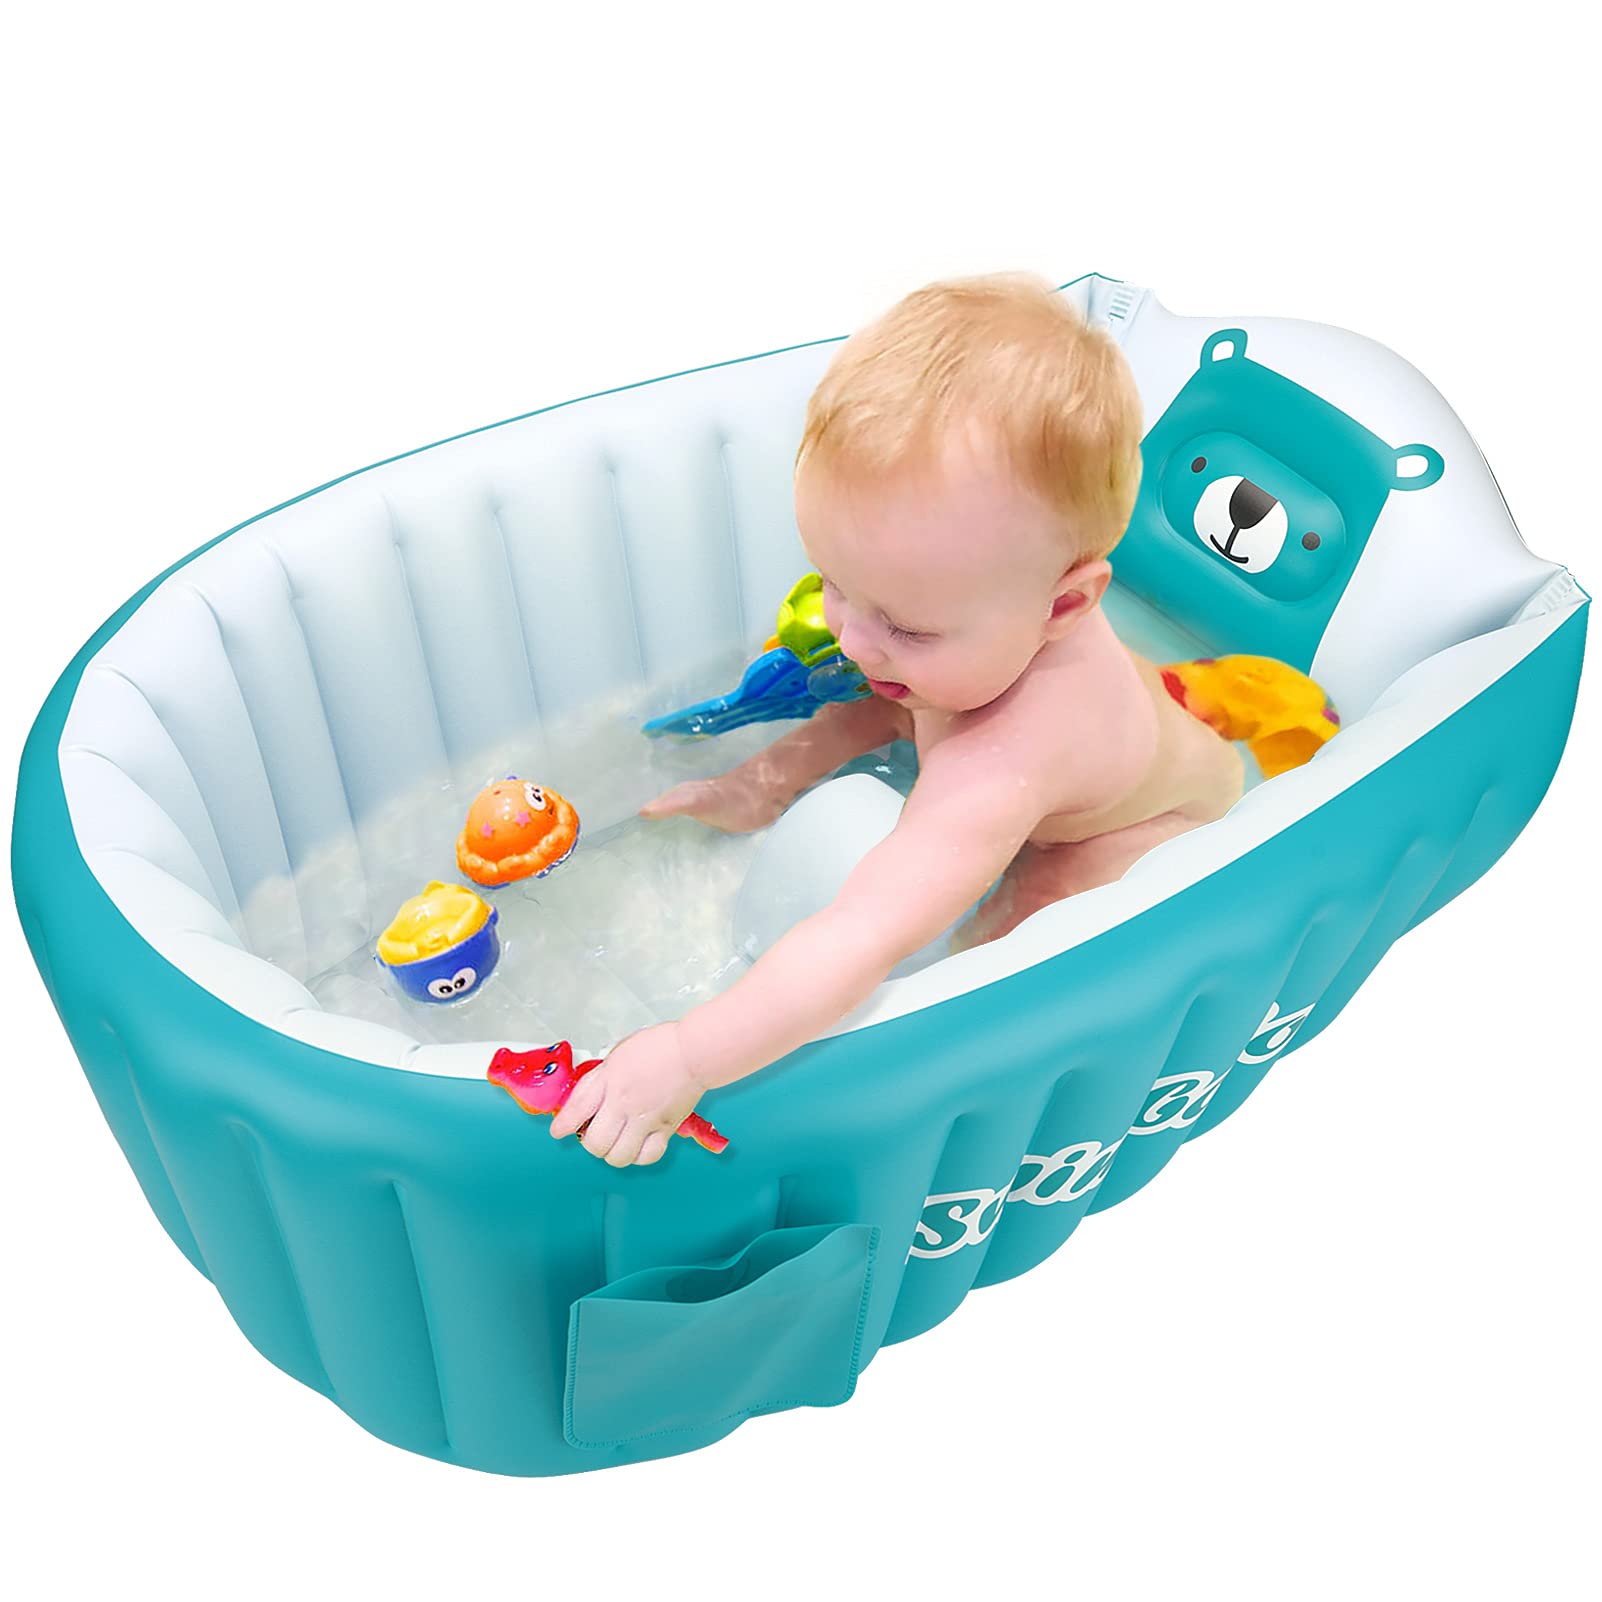 SHXKUAN Inflatable Bathing Tub for Toddler,Non Slip Safety Thick Cushion Central Seat,Portable Travel Seat Baths Baby Swimming P